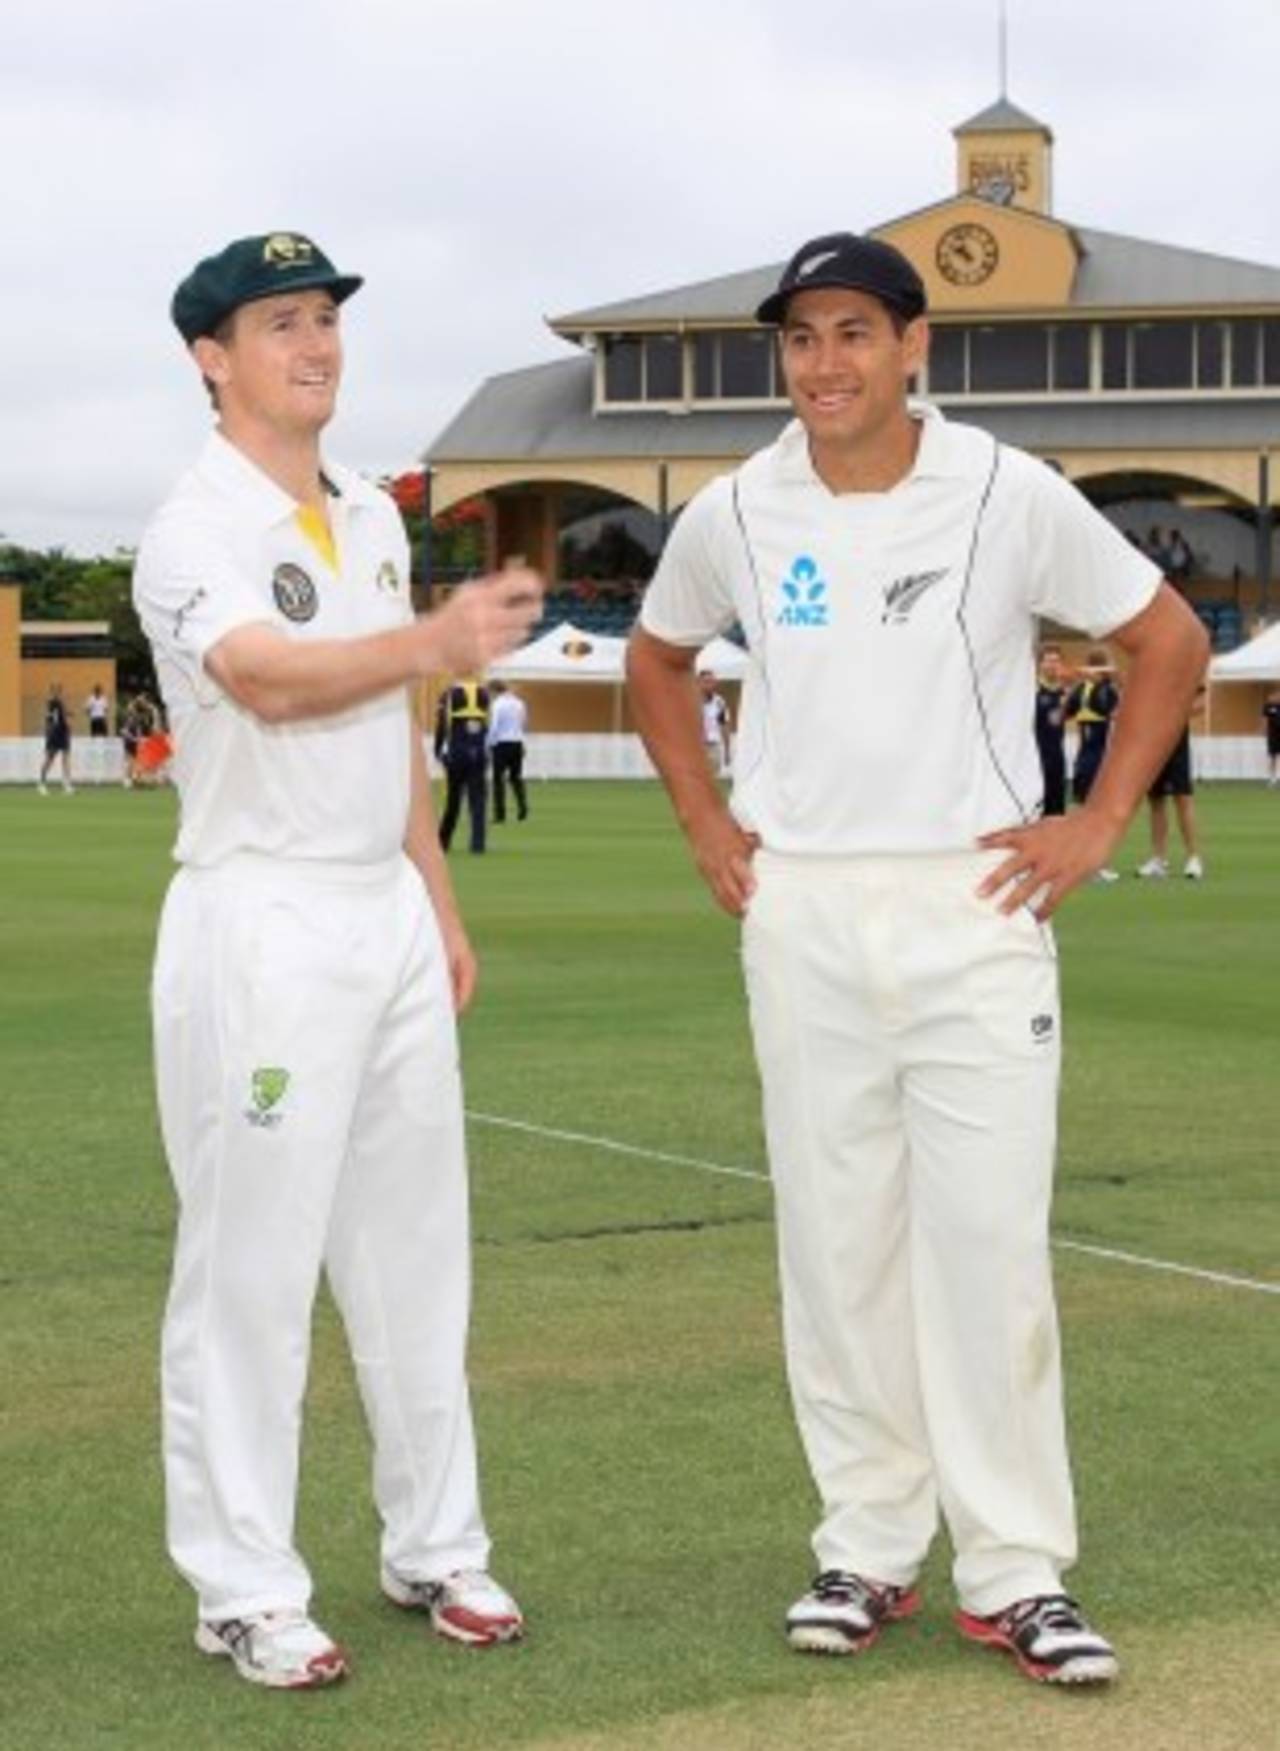 George Bailey (left) tosses the coin with Ross Taylor, Australia A v New Zealanders, Brisbane, November 24, 2011